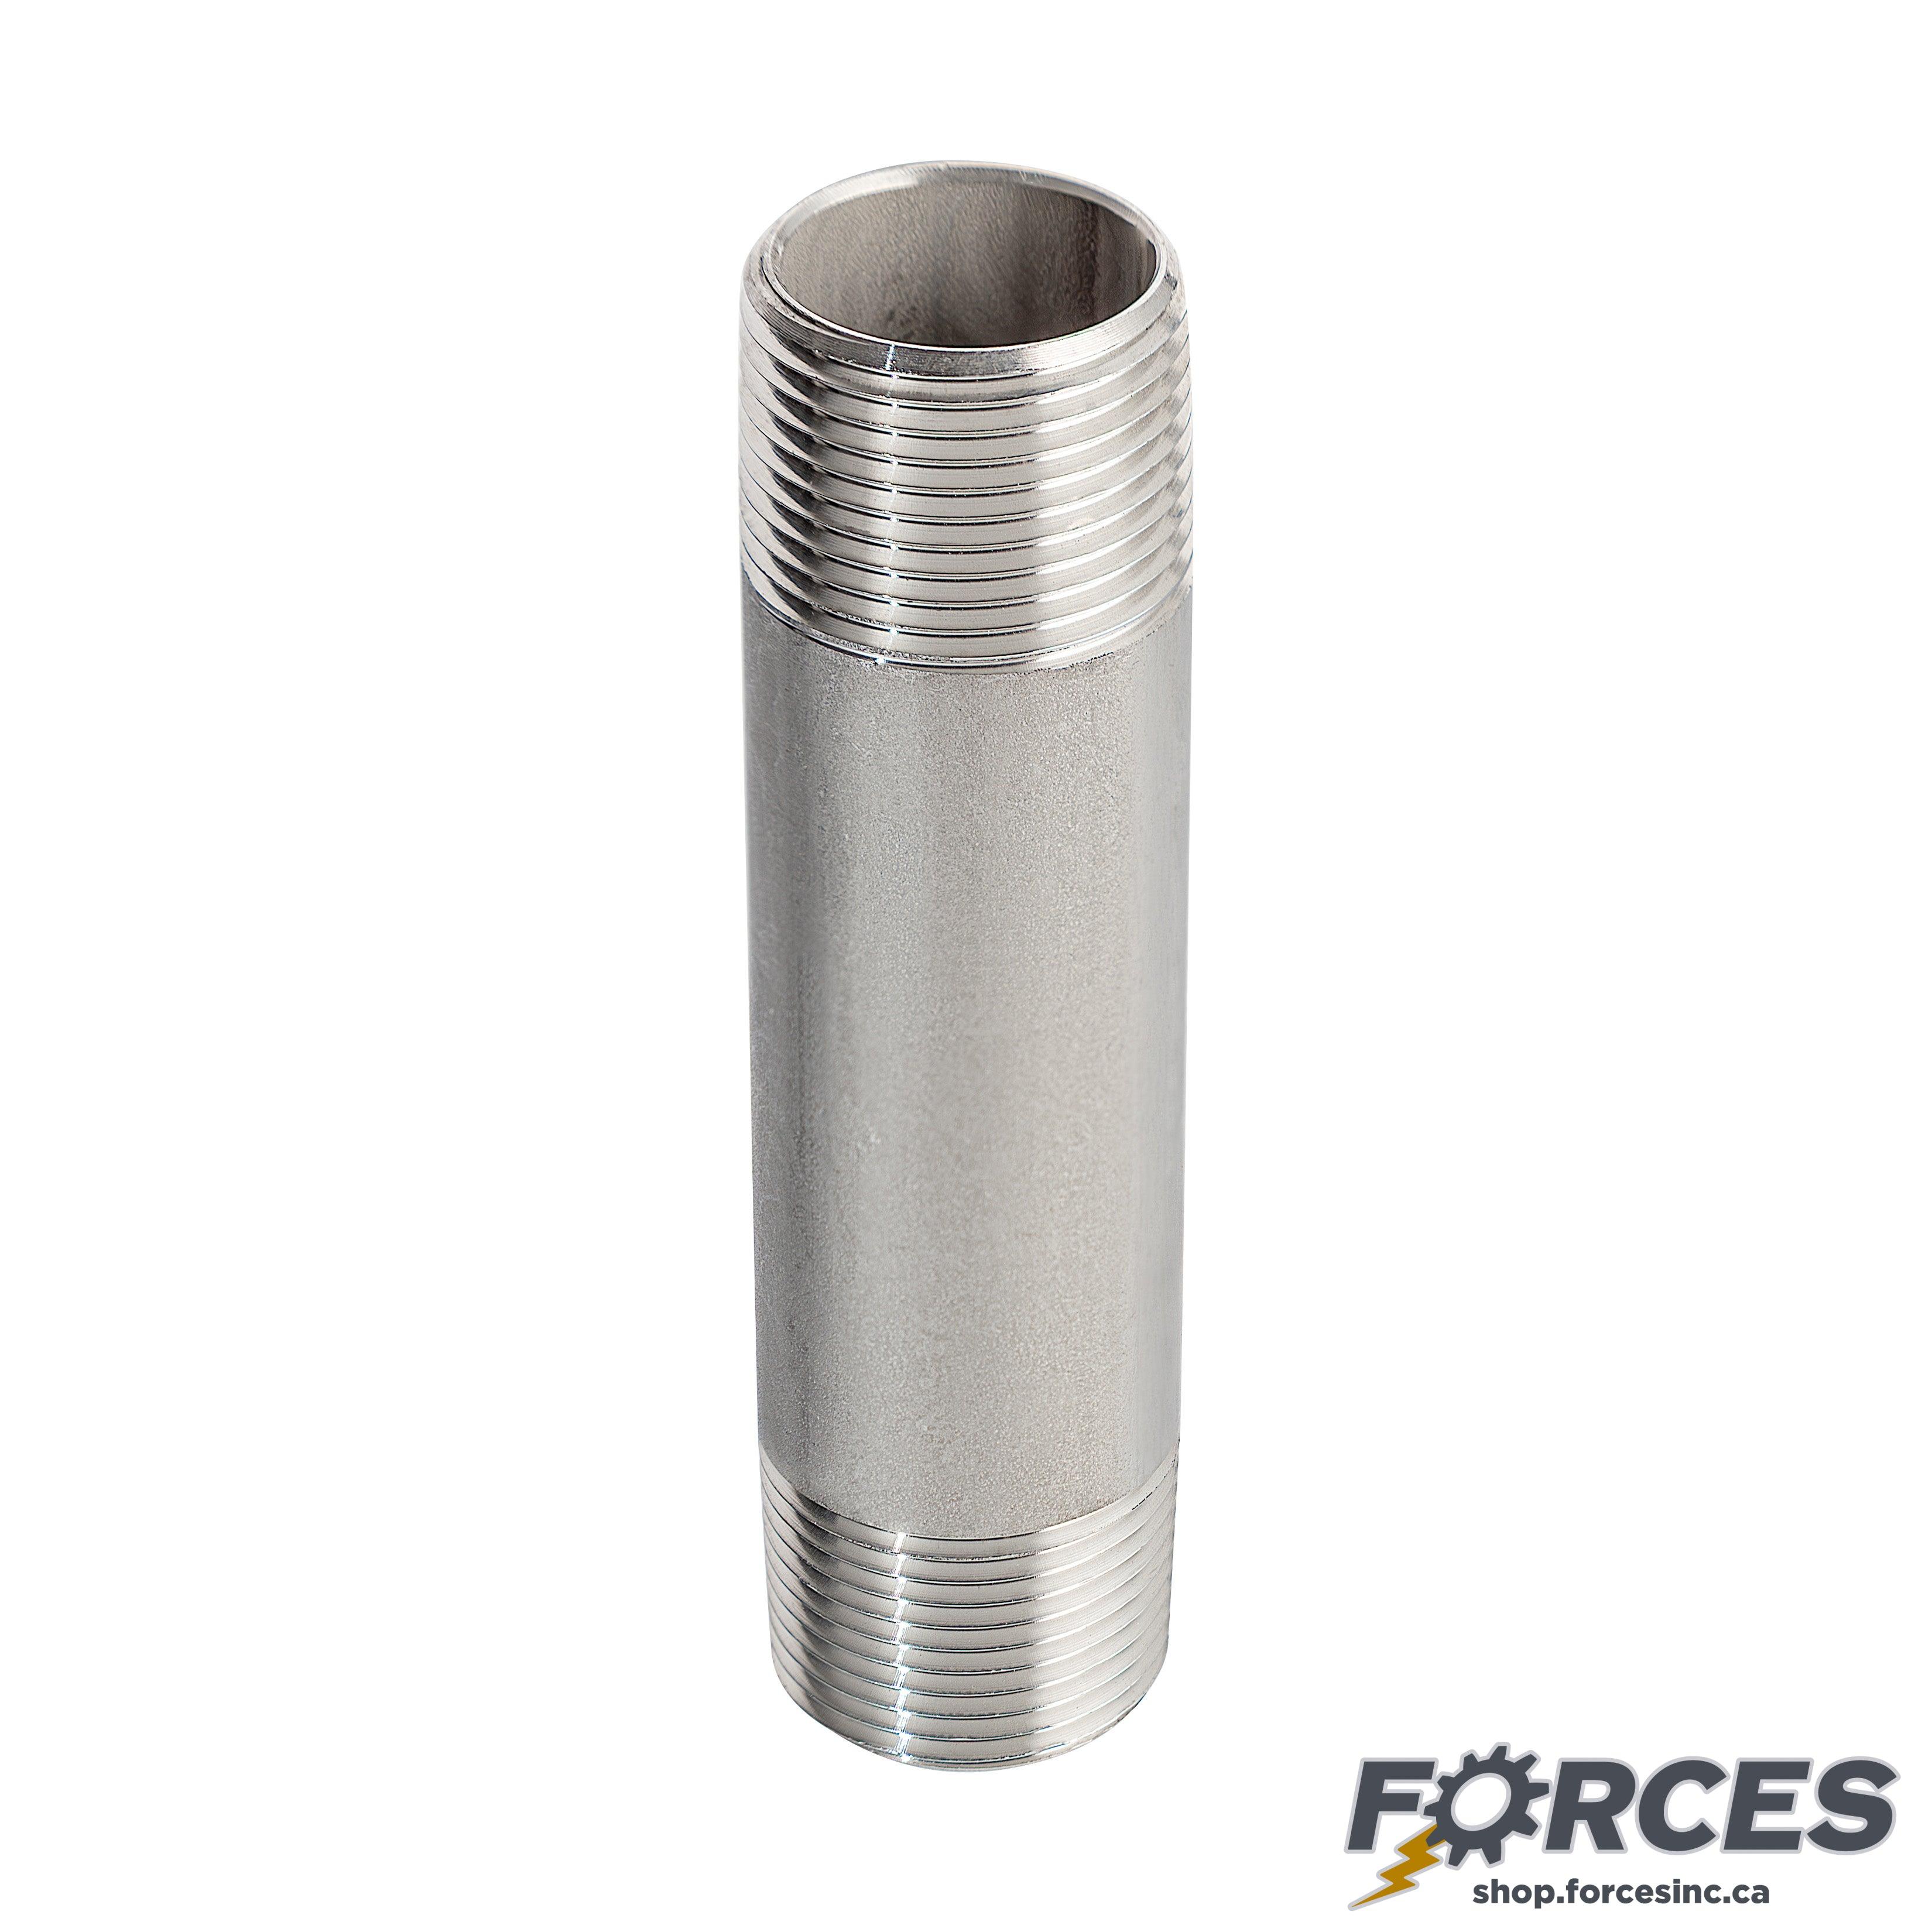 3/8" X 4" Long Nipple - Stainless Steel 316 - Forces Inc